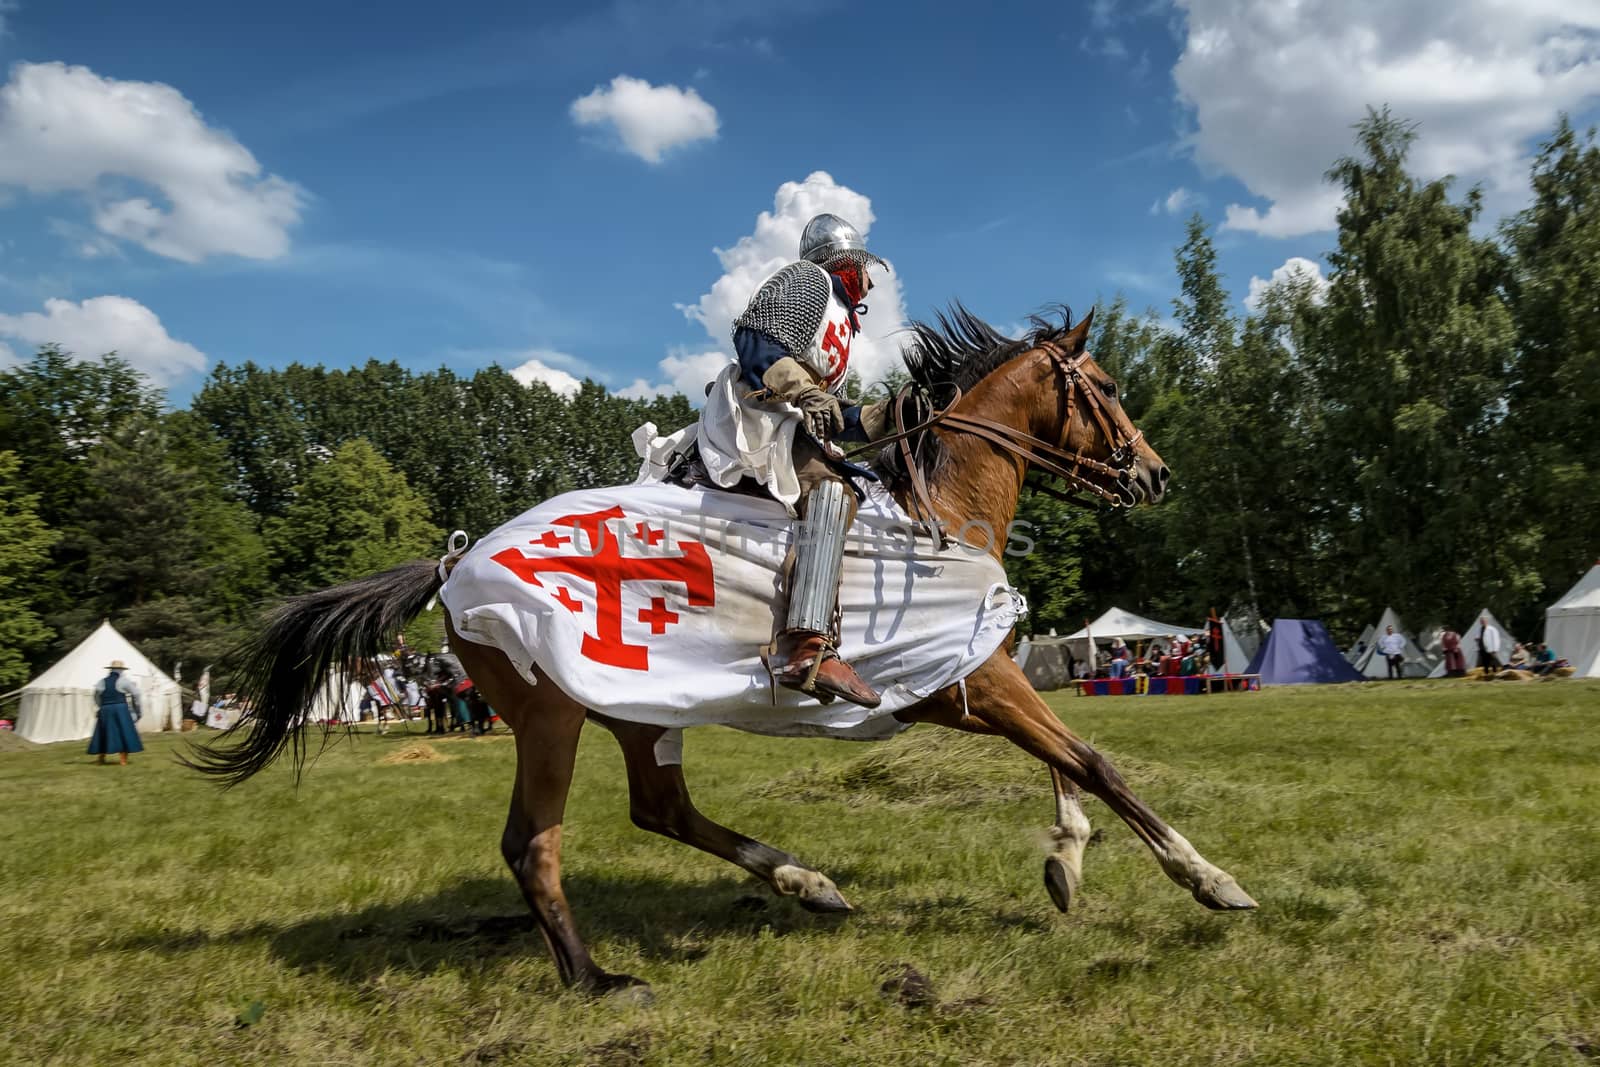 CHORZOW,POLAND, JUNE 9: Medieval knight on horseback during a IV Convention of Christian Knighthood on June 9, 2013, in Chorzow